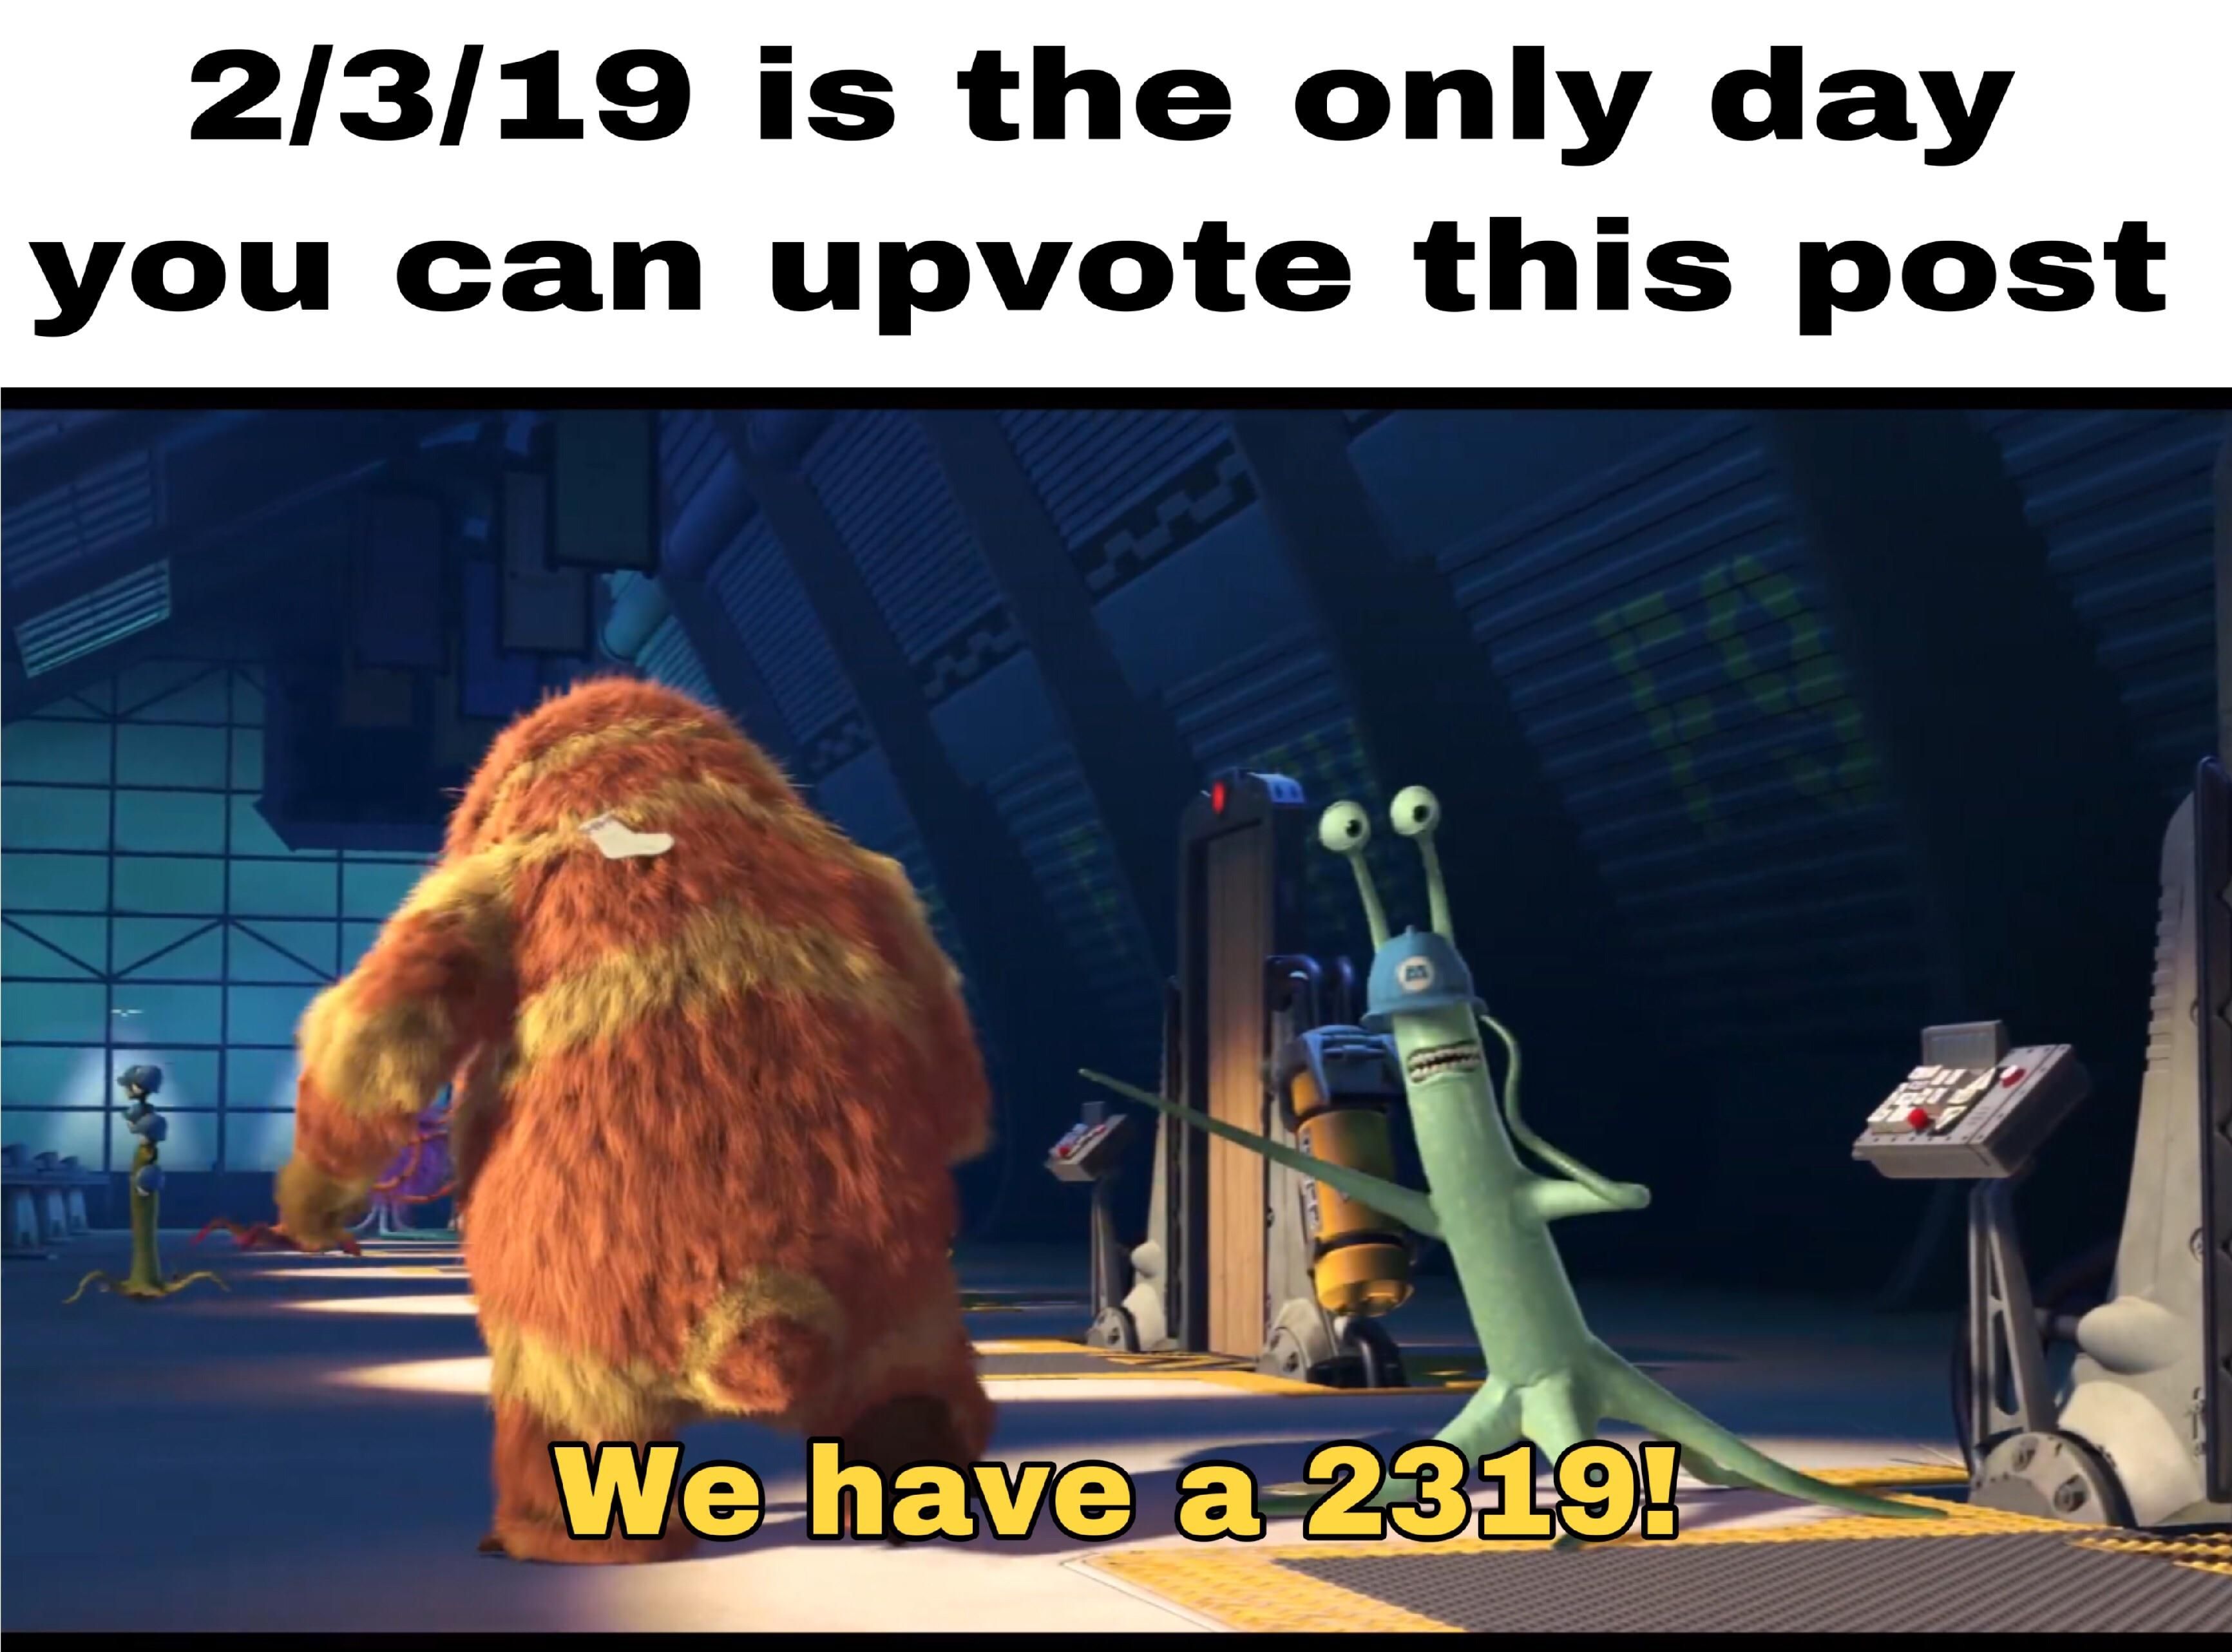 Today only guys